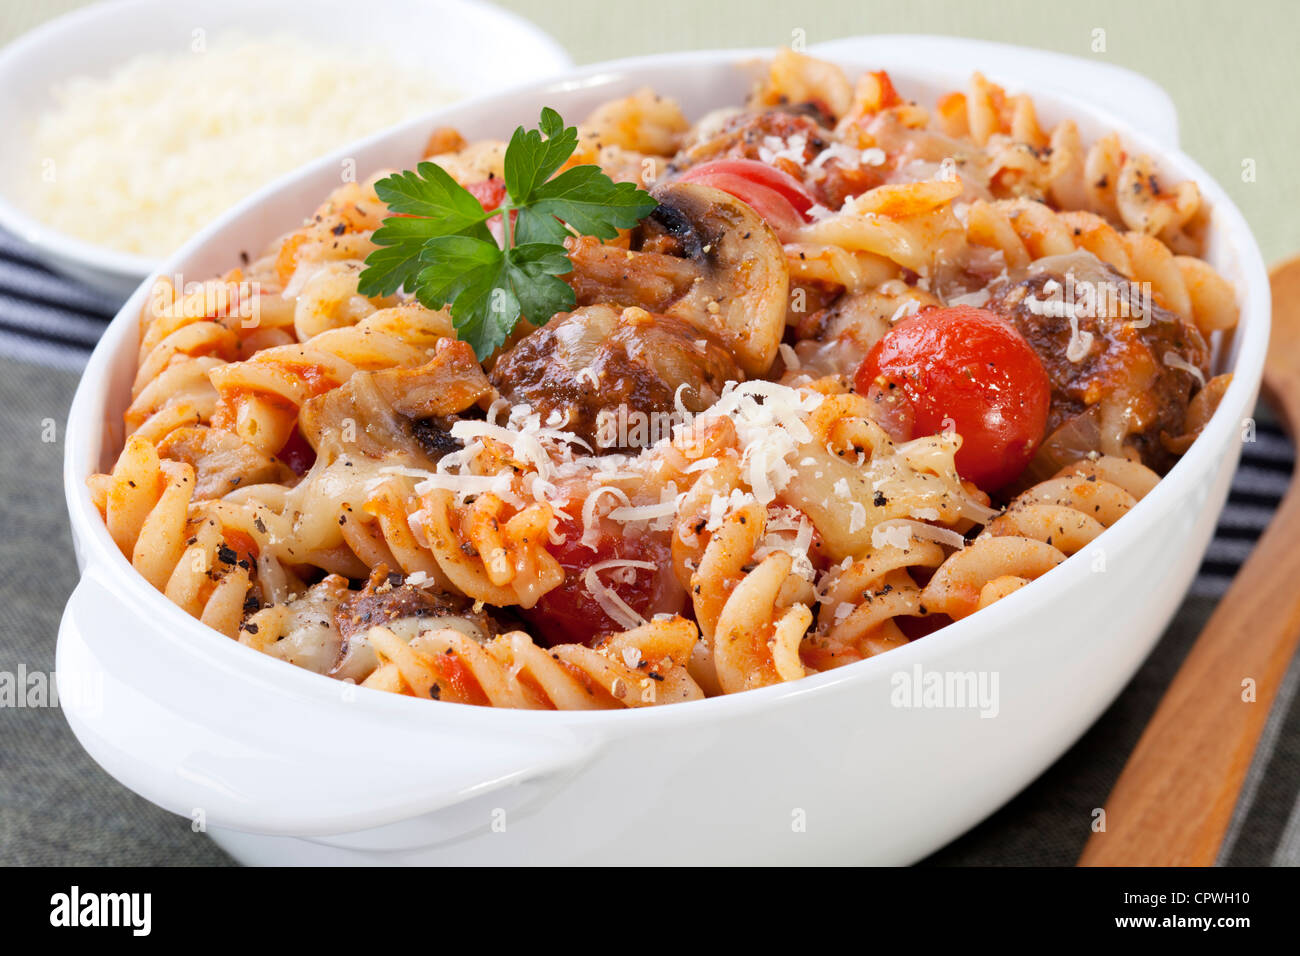 Pasta bake with meatballs, mushrooms and cherry tomatoes, in tomato sauce, with melting mozzarella. Stock Photo